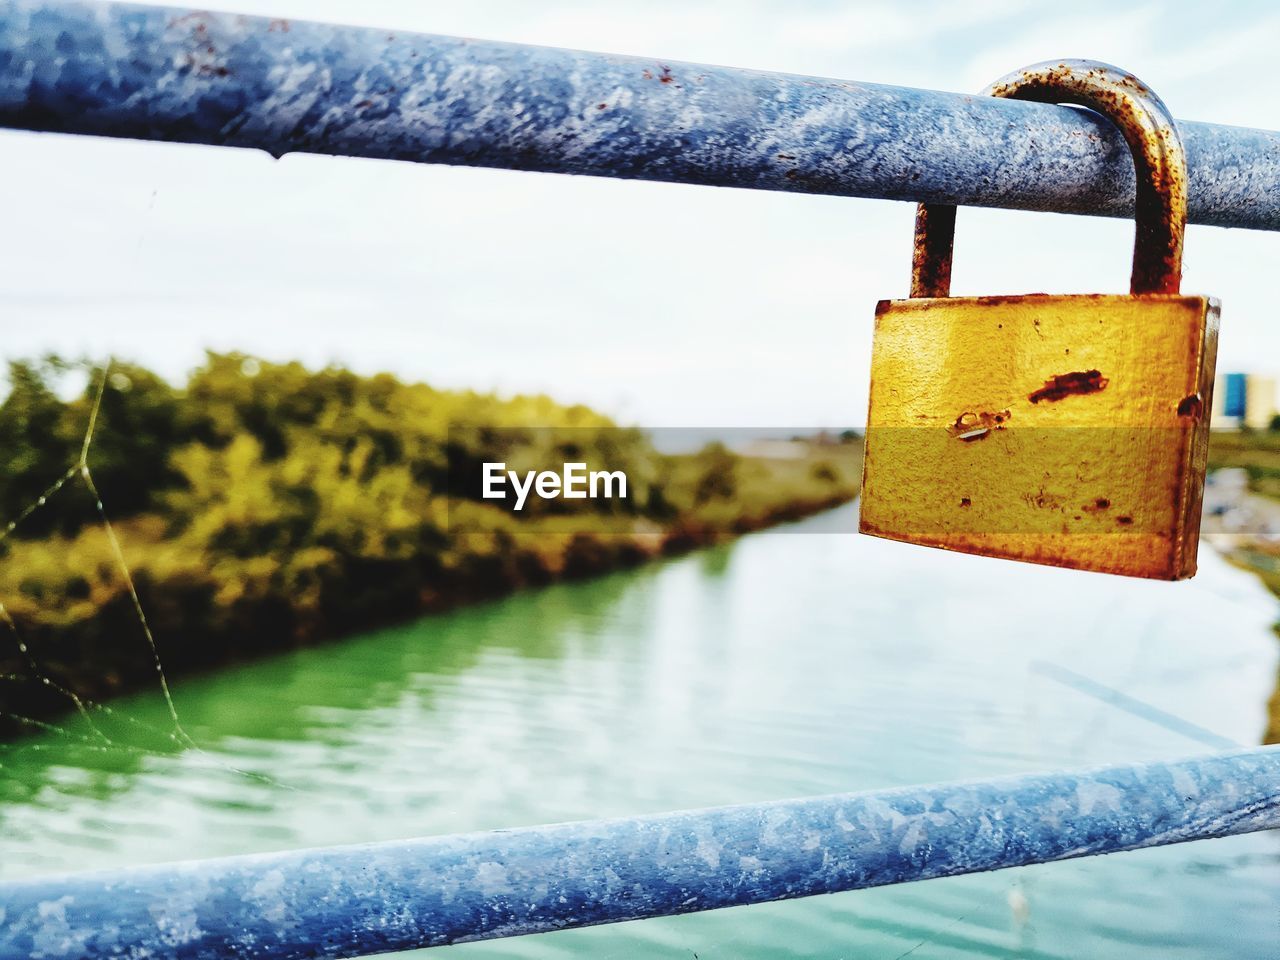 water, padlock, yellow, protection, blue, security, lock, nature, metal, hanging, focus on foreground, railing, no people, day, river, outdoors, love, positive emotion, close-up, green, hope, emotion, fence, reflection, tree, sky, bridge